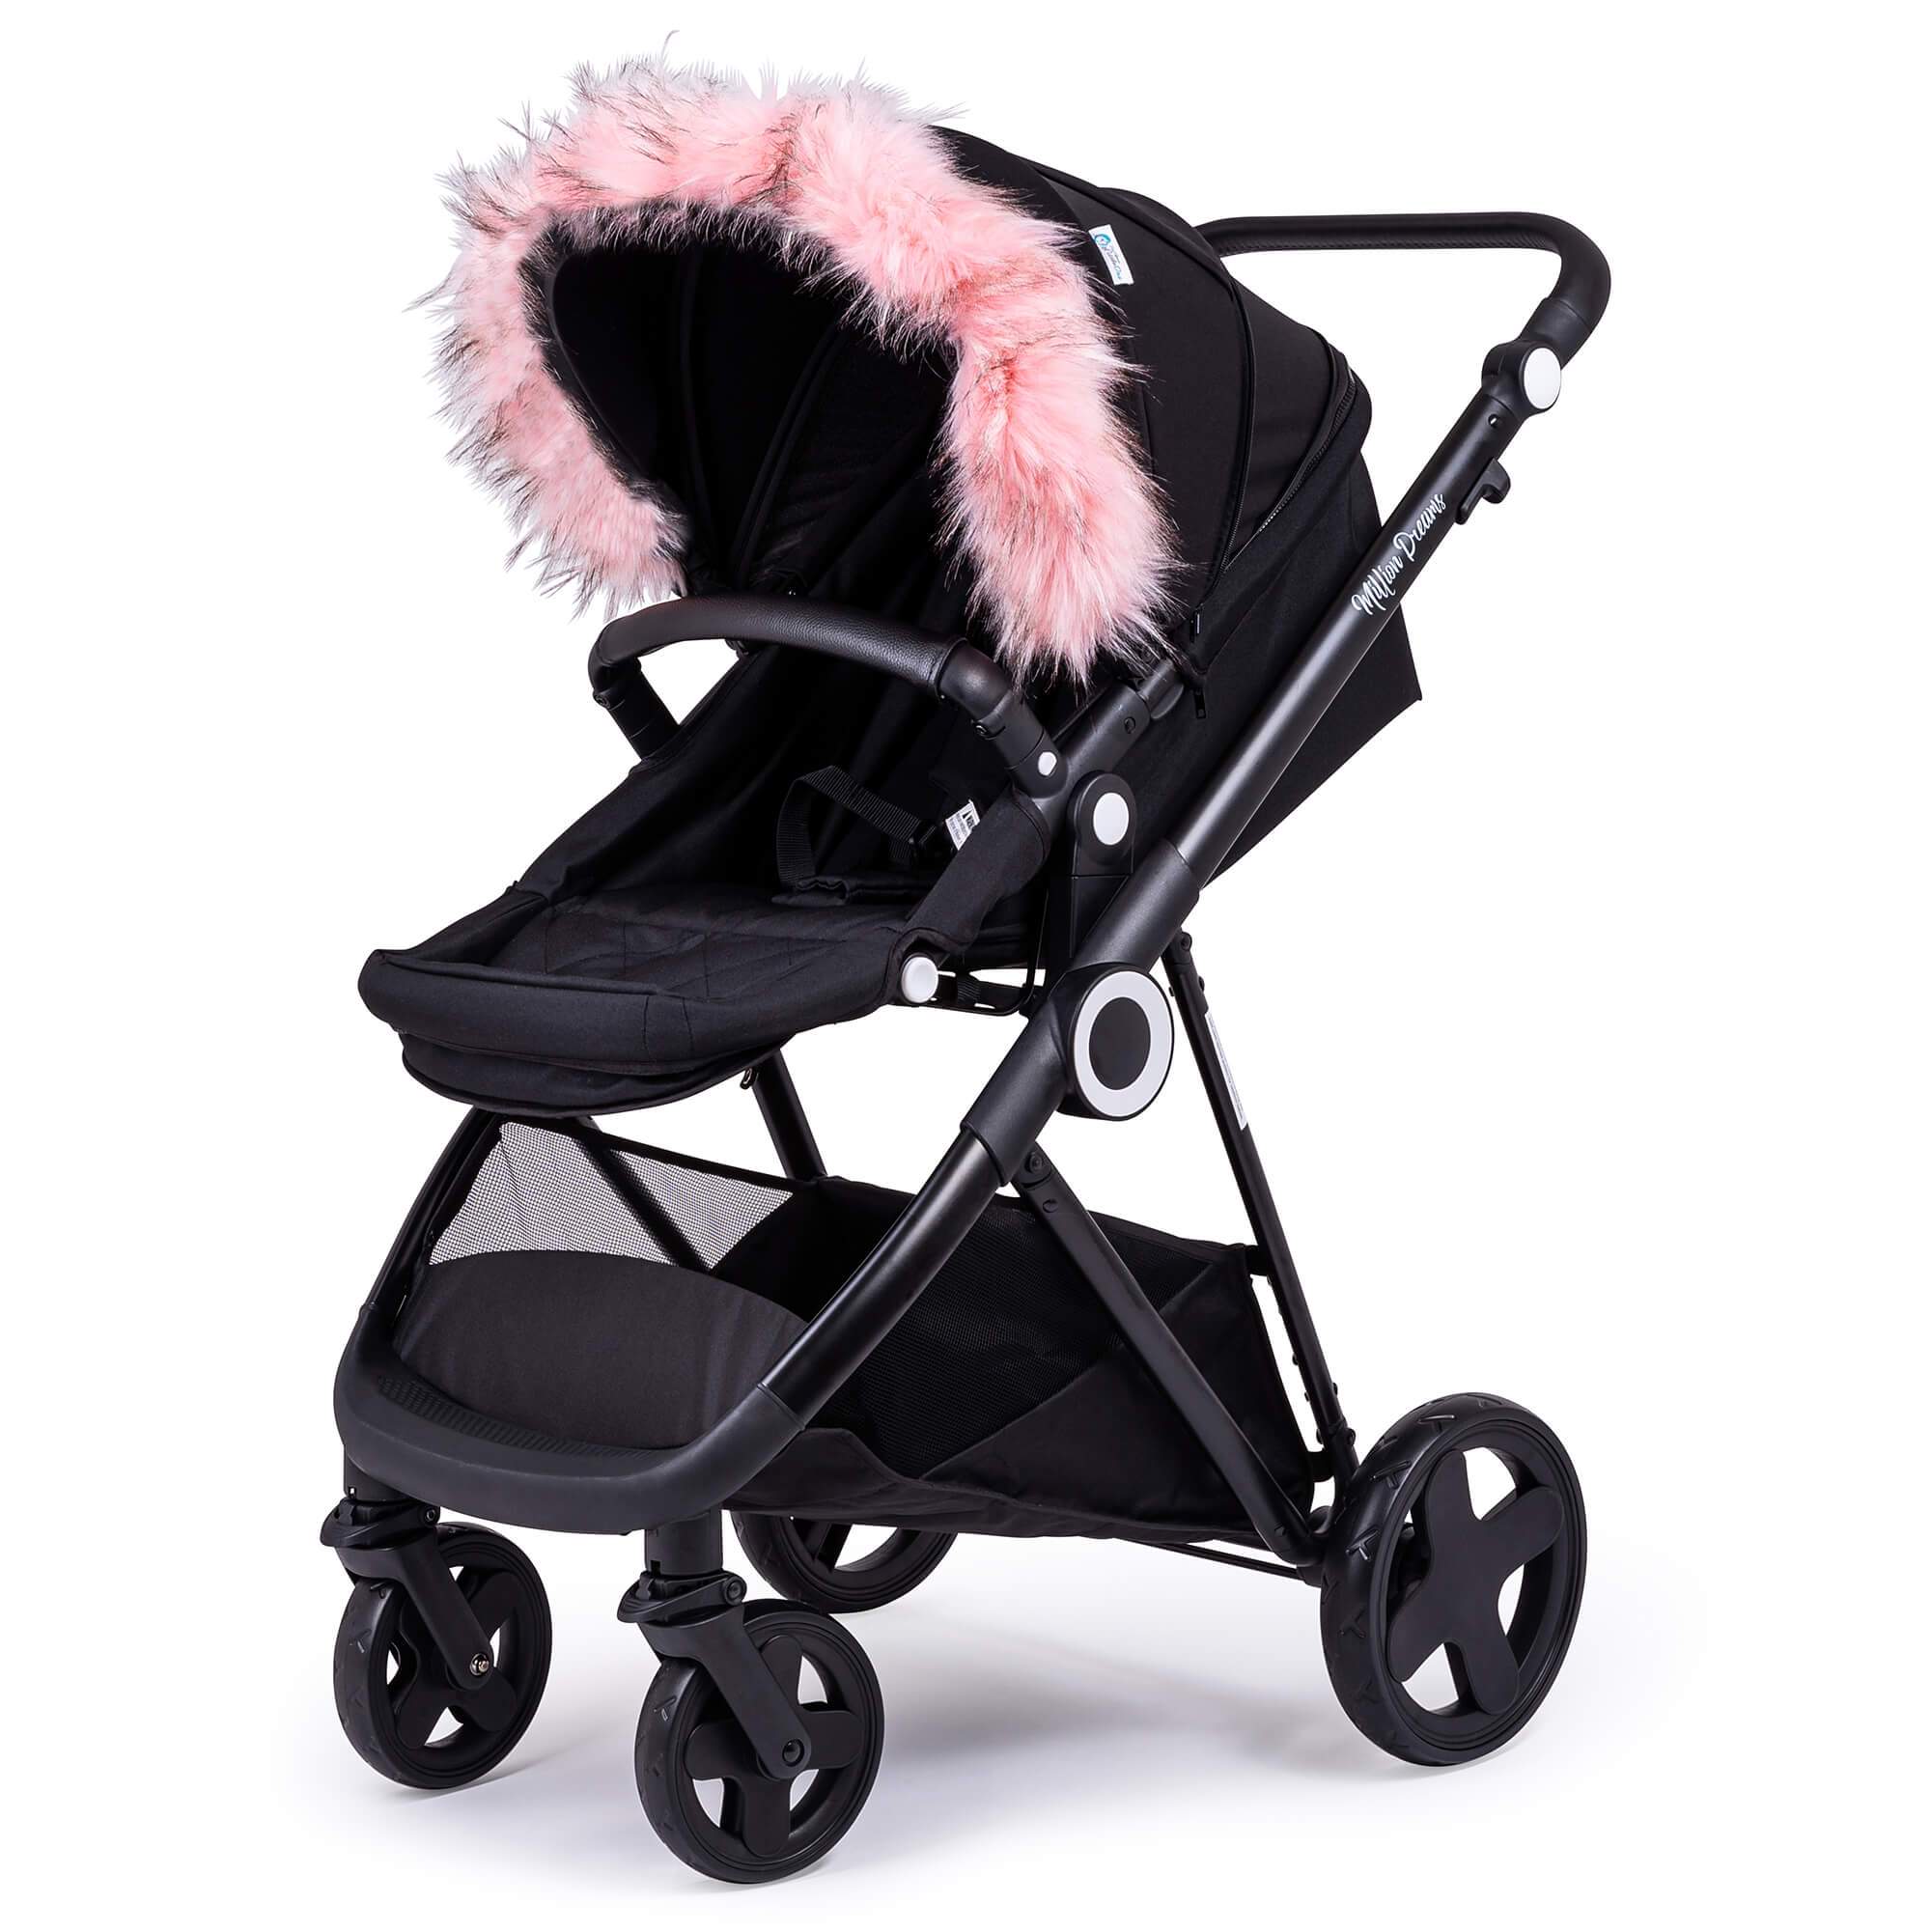 Pram Fur Hood Trim Attachment For Pushchair Compatible with Roma - Light Pink / Fits All Models | For Your Little One